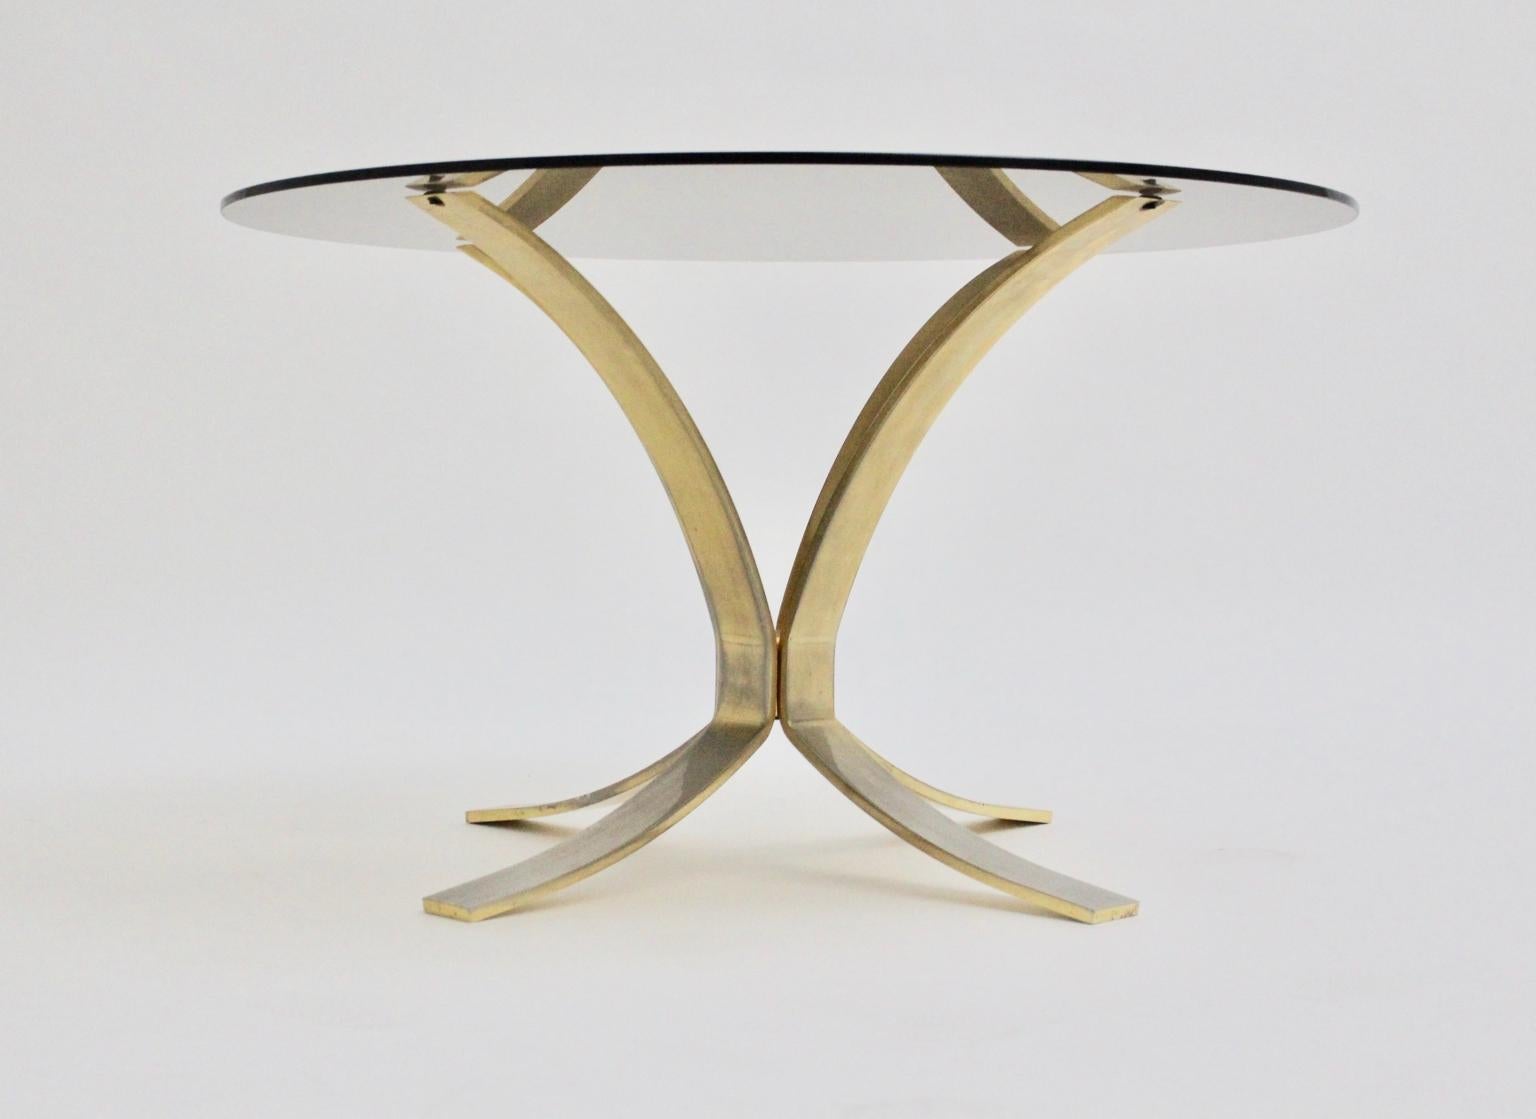 The coffee table by Roger Sprunger for Dunbar Furniture, USA, shows a brass-plated base with brass patina and also a smoked glass top.
approx. measures:
Diameter: 80 cm (glass diameter)
Height 47 cm (including the glass top).